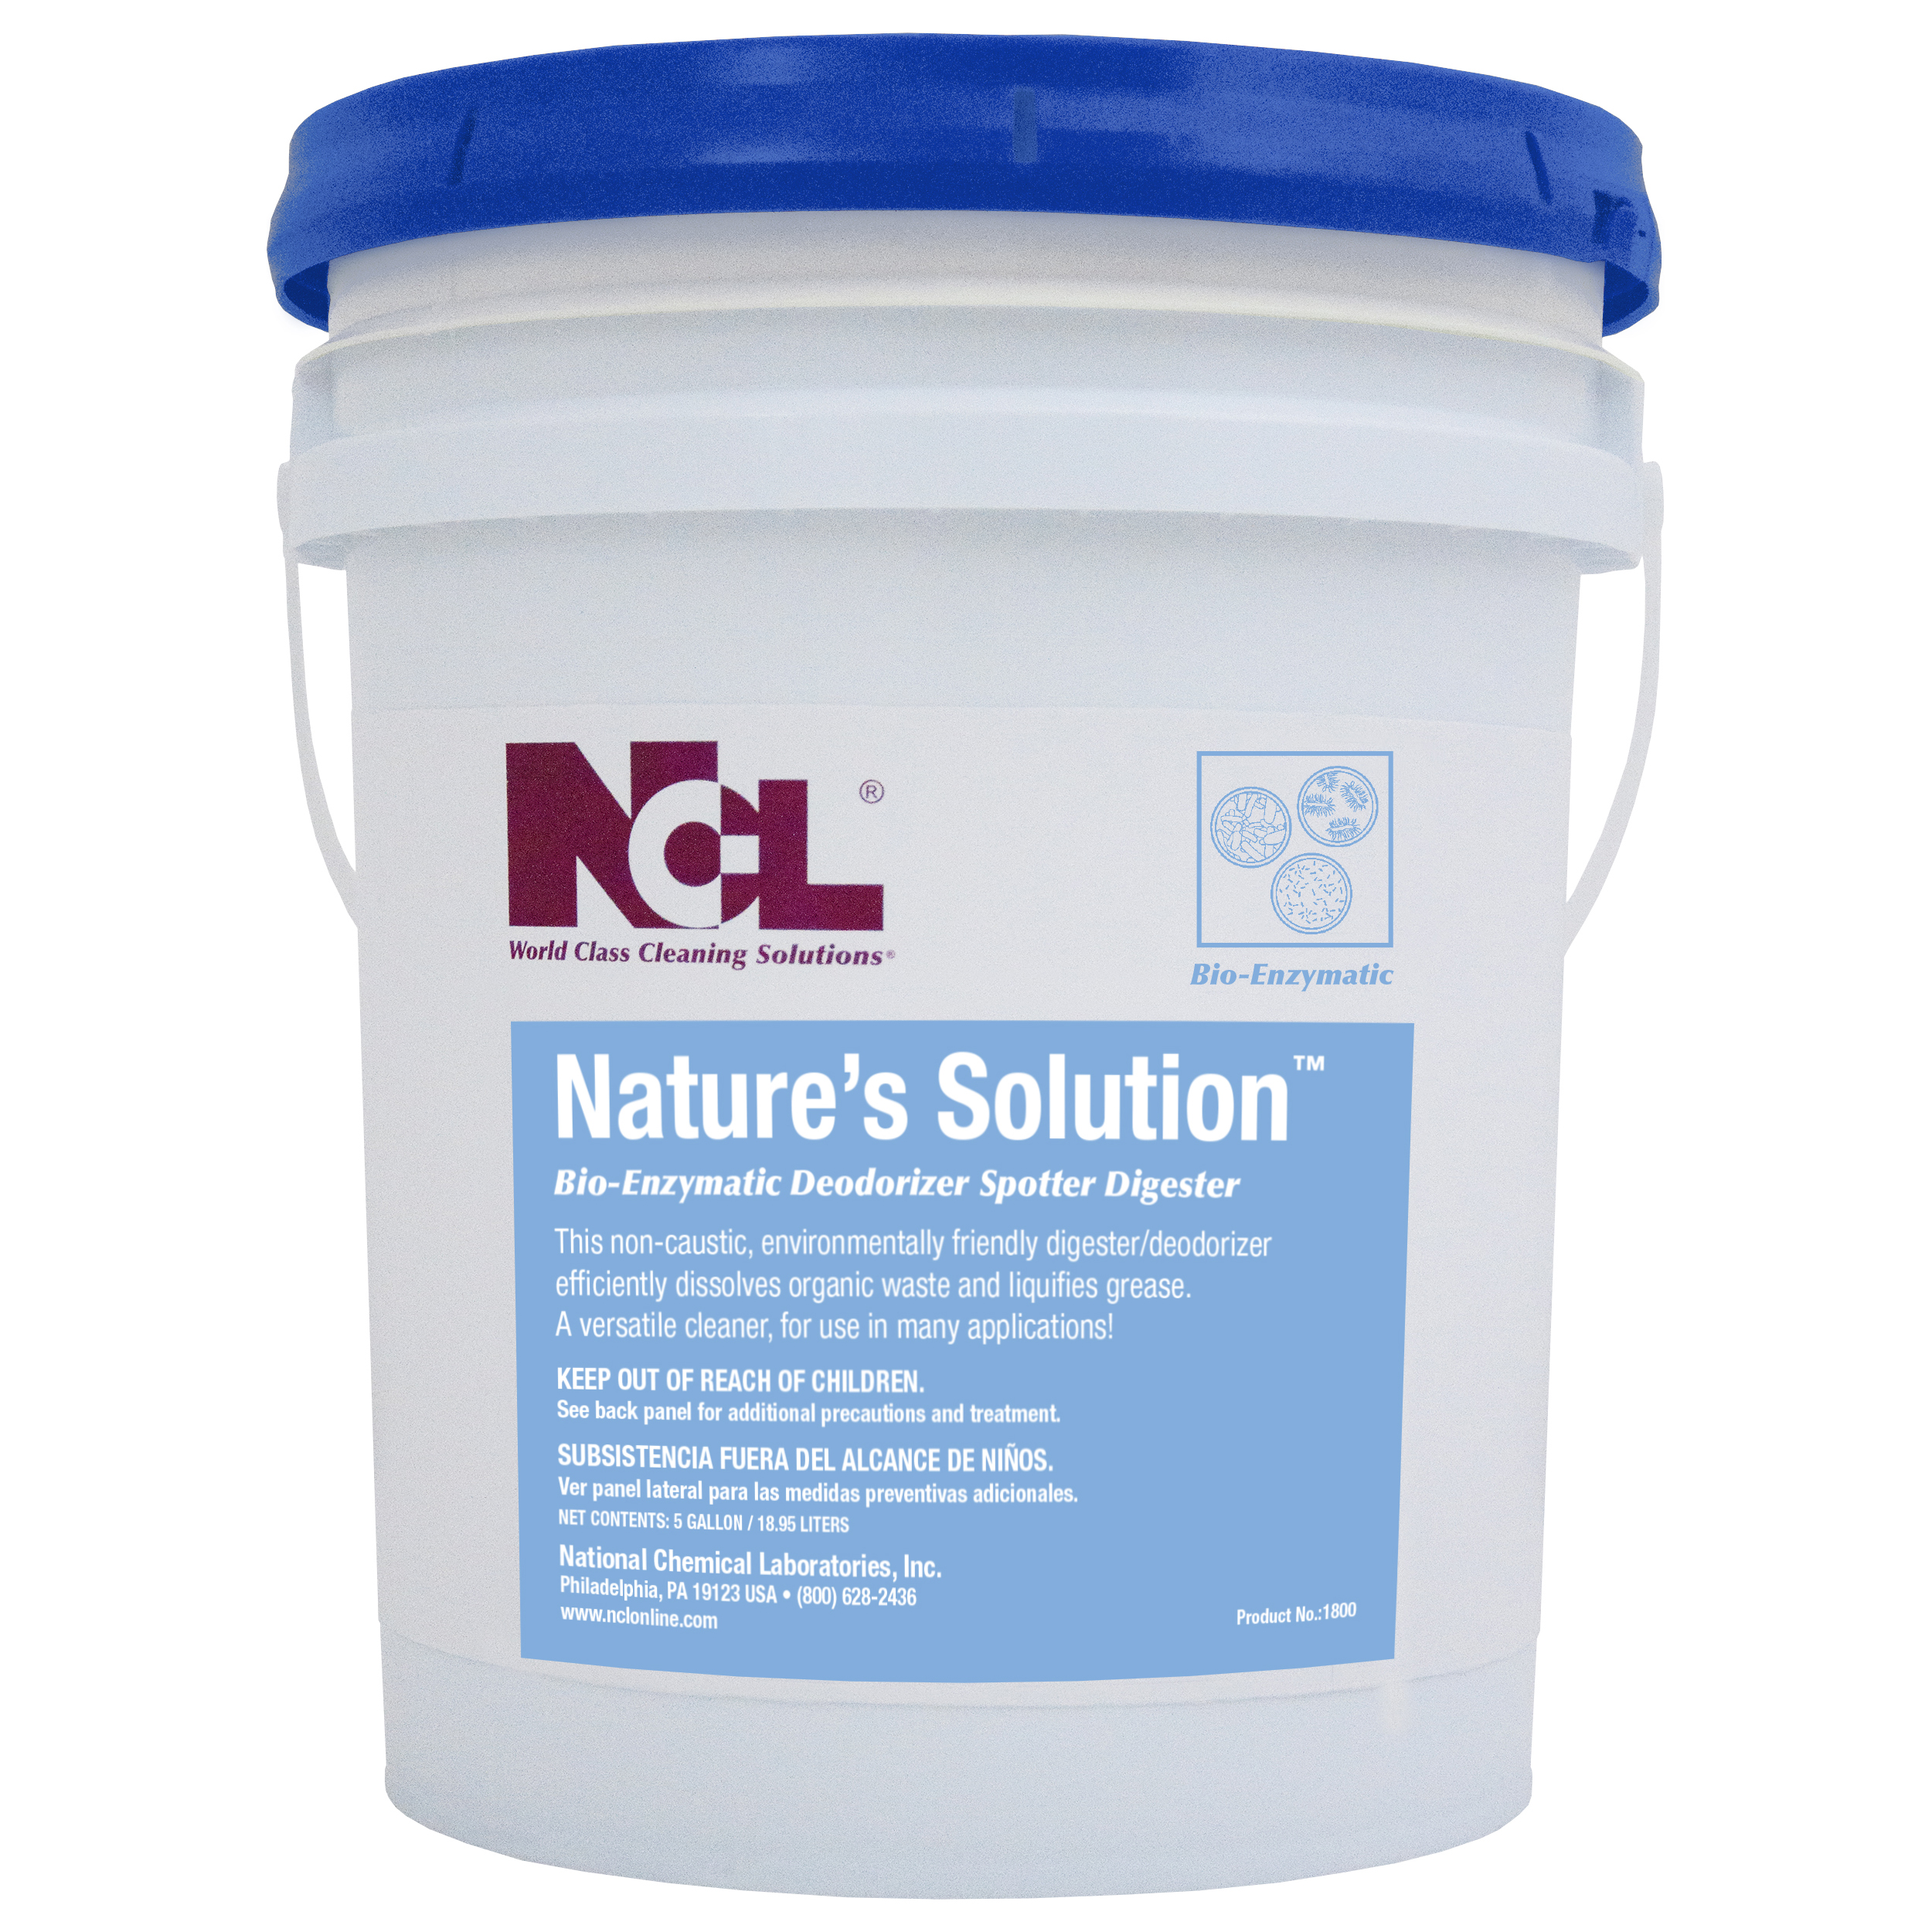  NATURE'S SOLUTION Bio-Enzymatic Deodorizer / Spotter / Digester 5 Gal. Pail (NCL1800-21) 